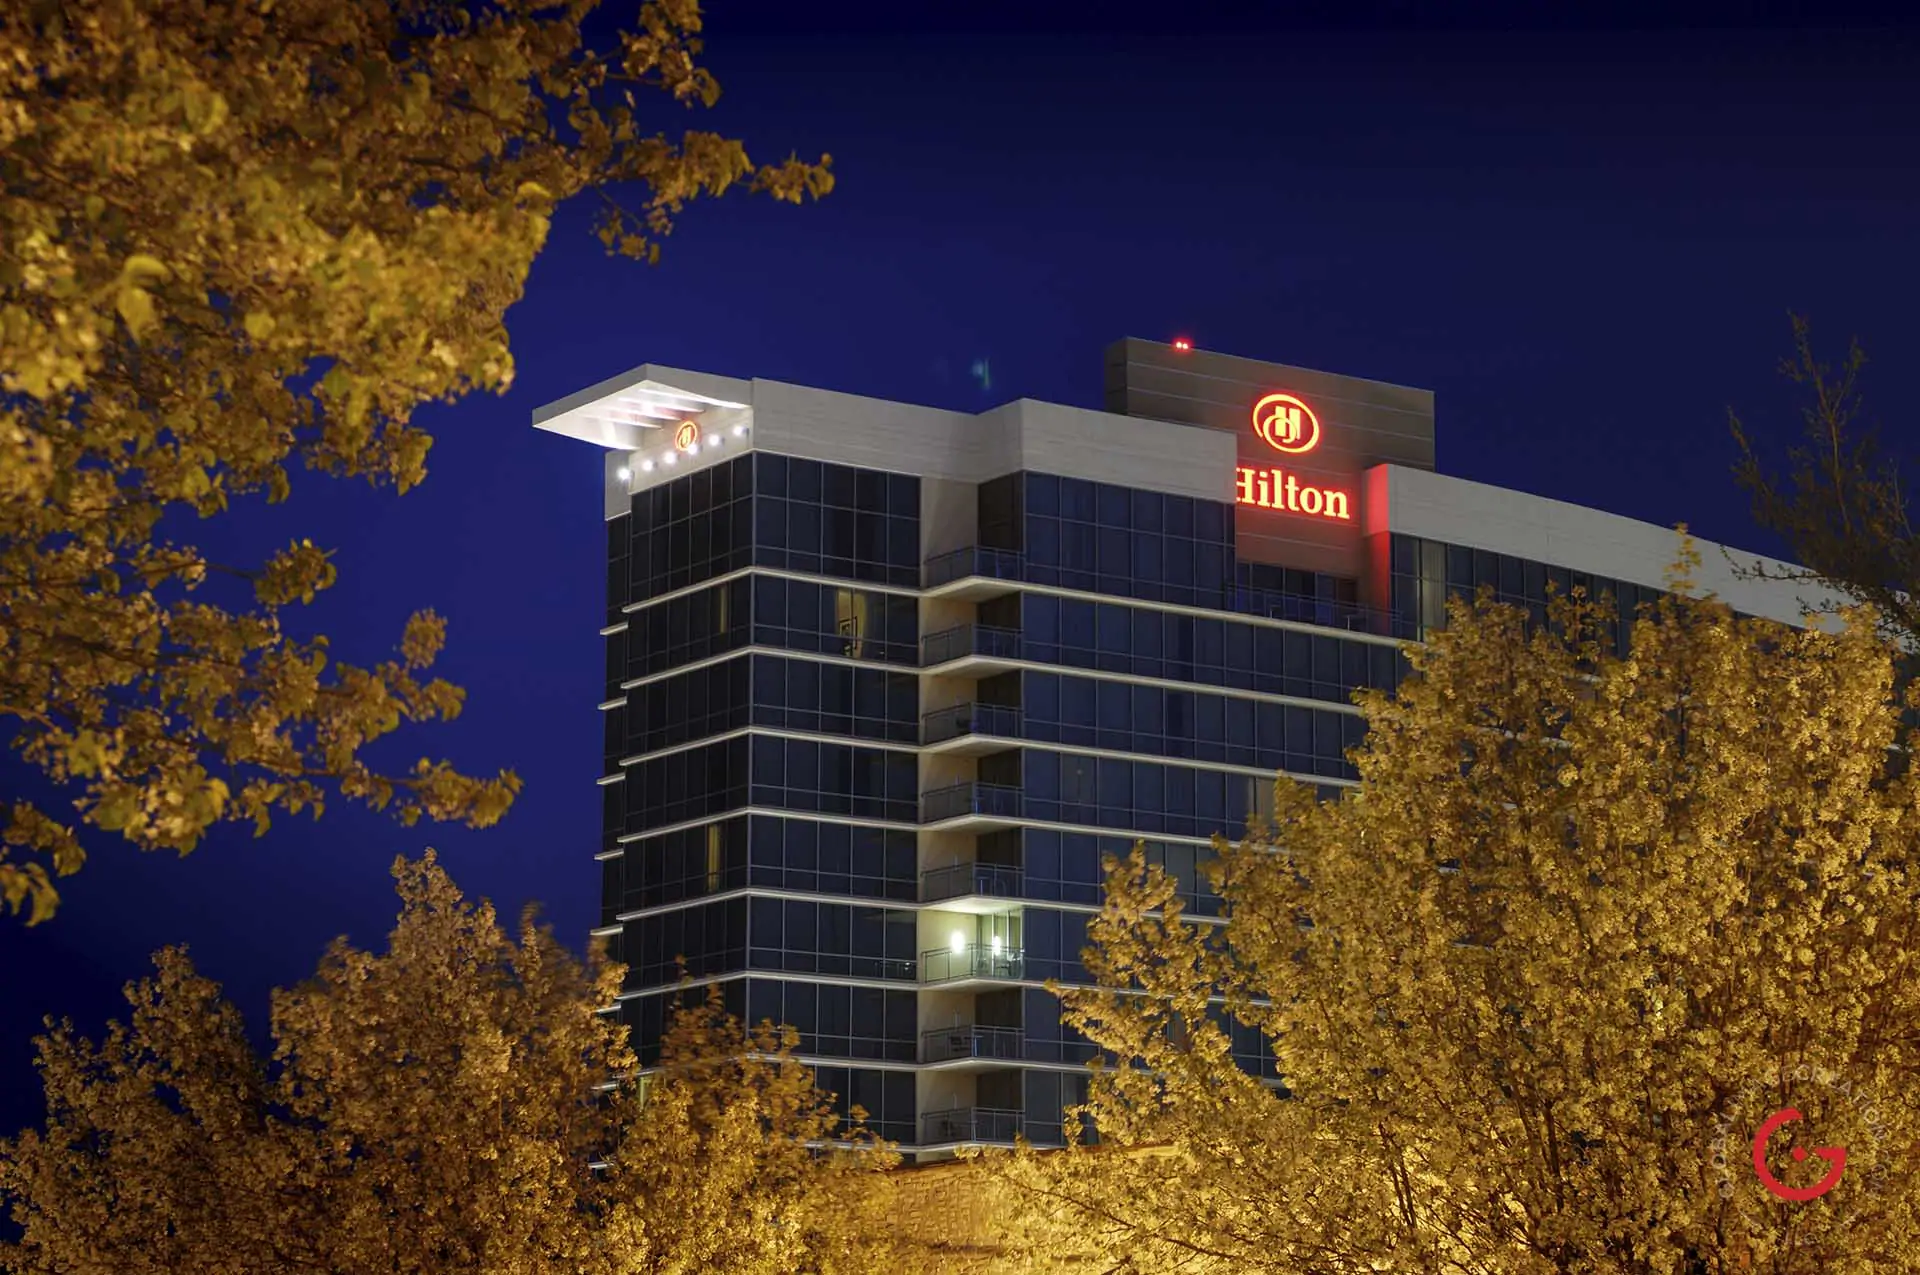 Branson Hilton Convention Center Hotel framed by fall leaves in the night sky. - Advertising photographers in Branson Missouri, Branson Missouri photography